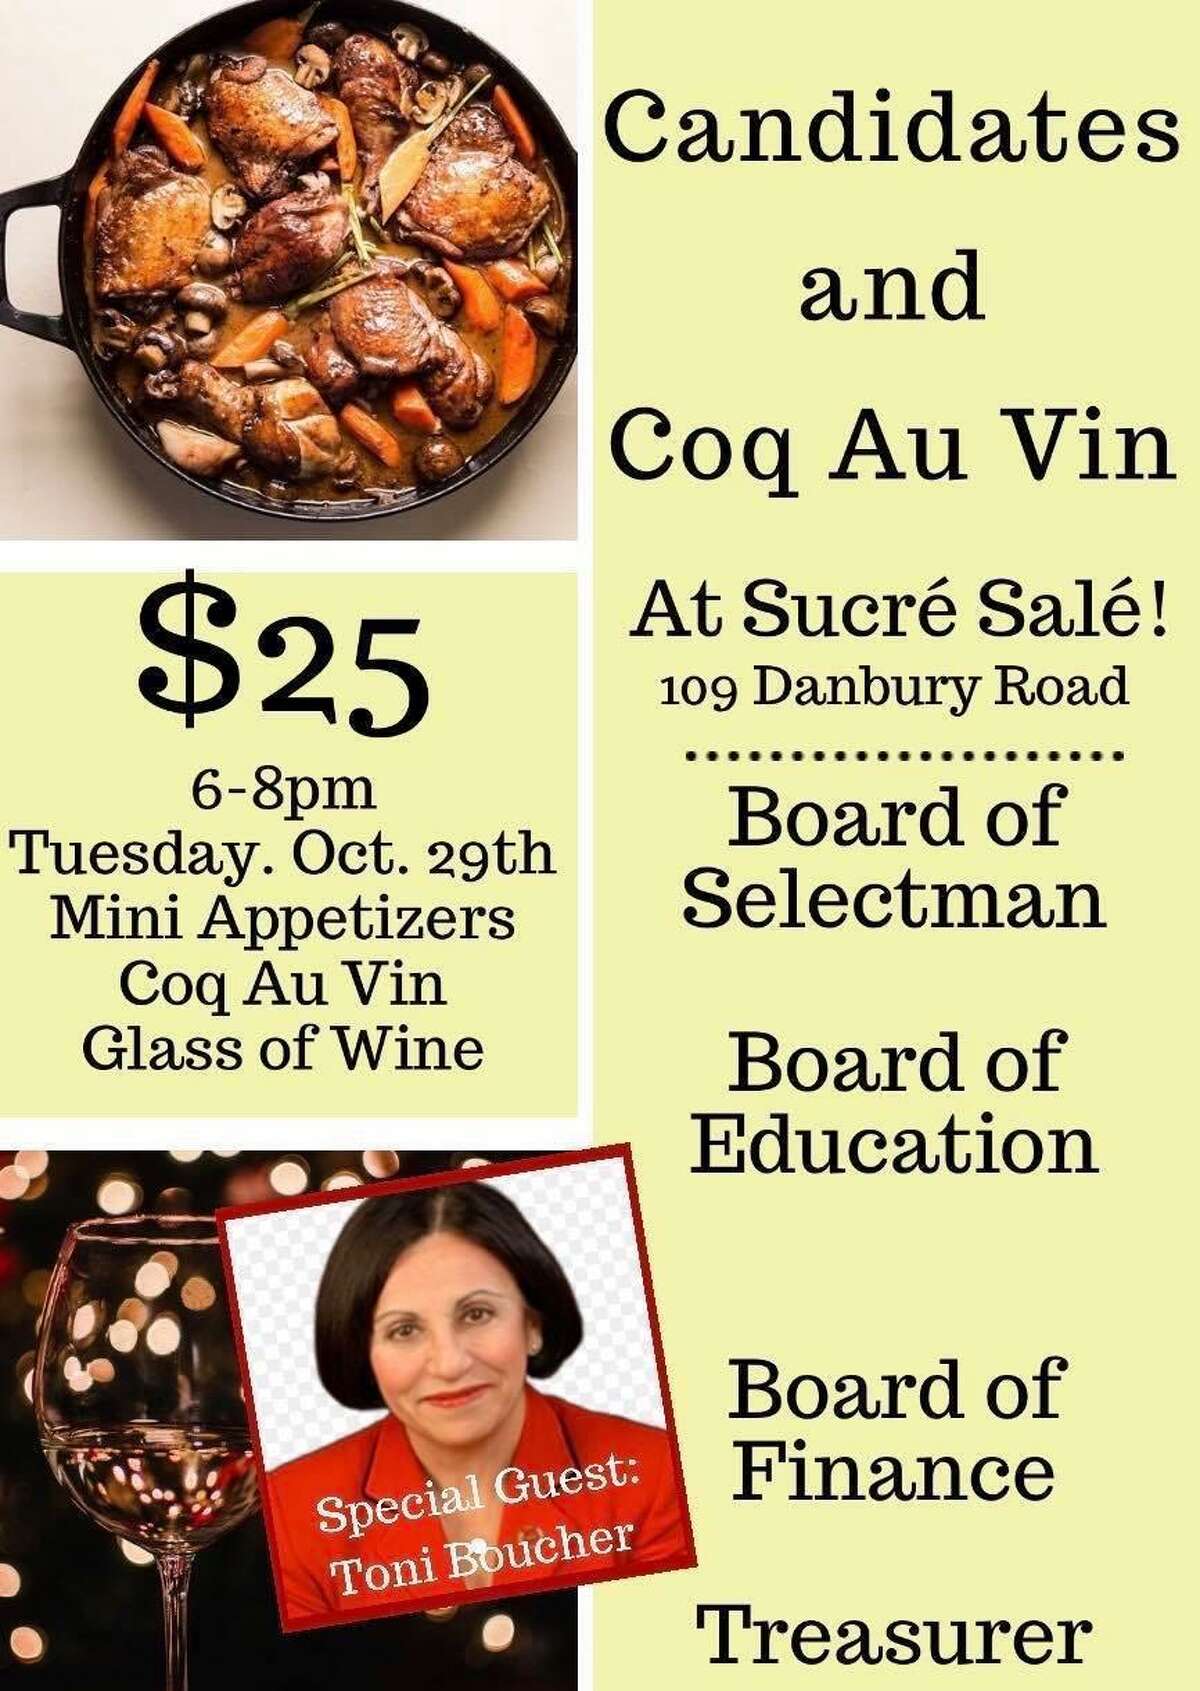 Candidates and Coq Au Vin will be held Oct. 29, from 6 to 8 p.m., at Sucre Sale, 109 Danbury Road, Ridgefield.